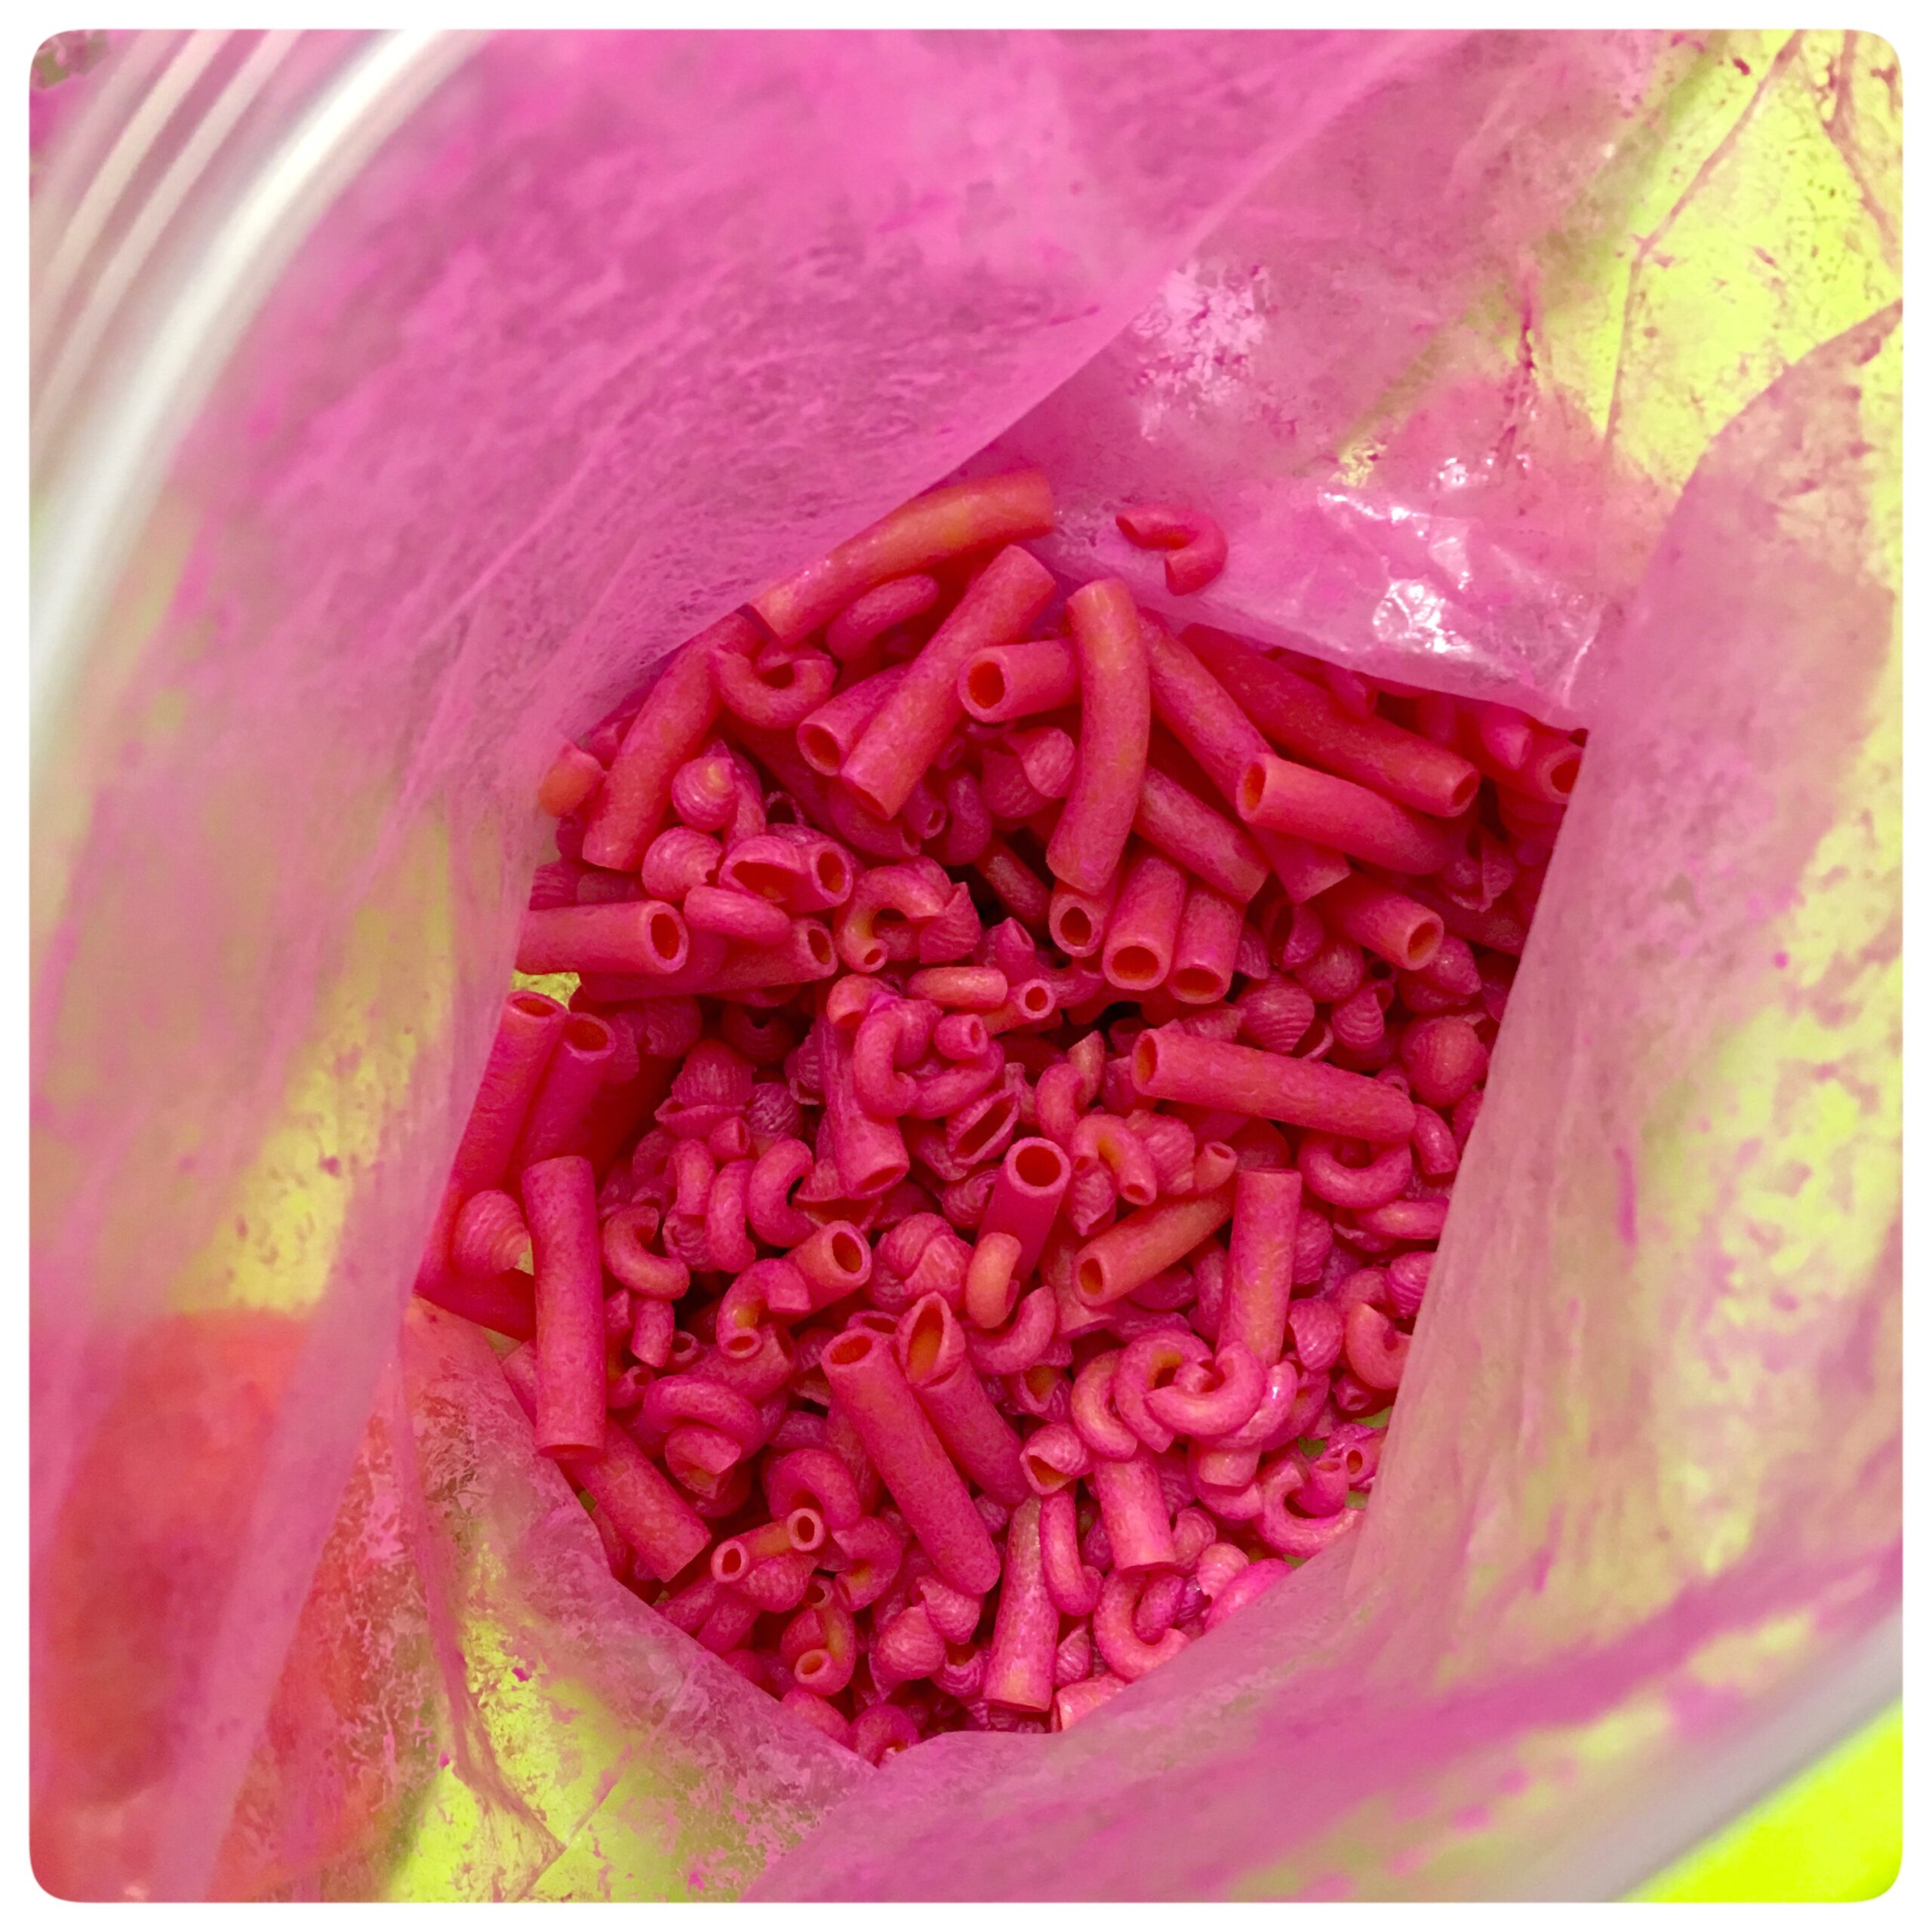 Come create a valentine's day themed sensory bin for your children.  Sensory bins allow children to safely explore the world around them and experience different textures.  Great for home or the classroom. 